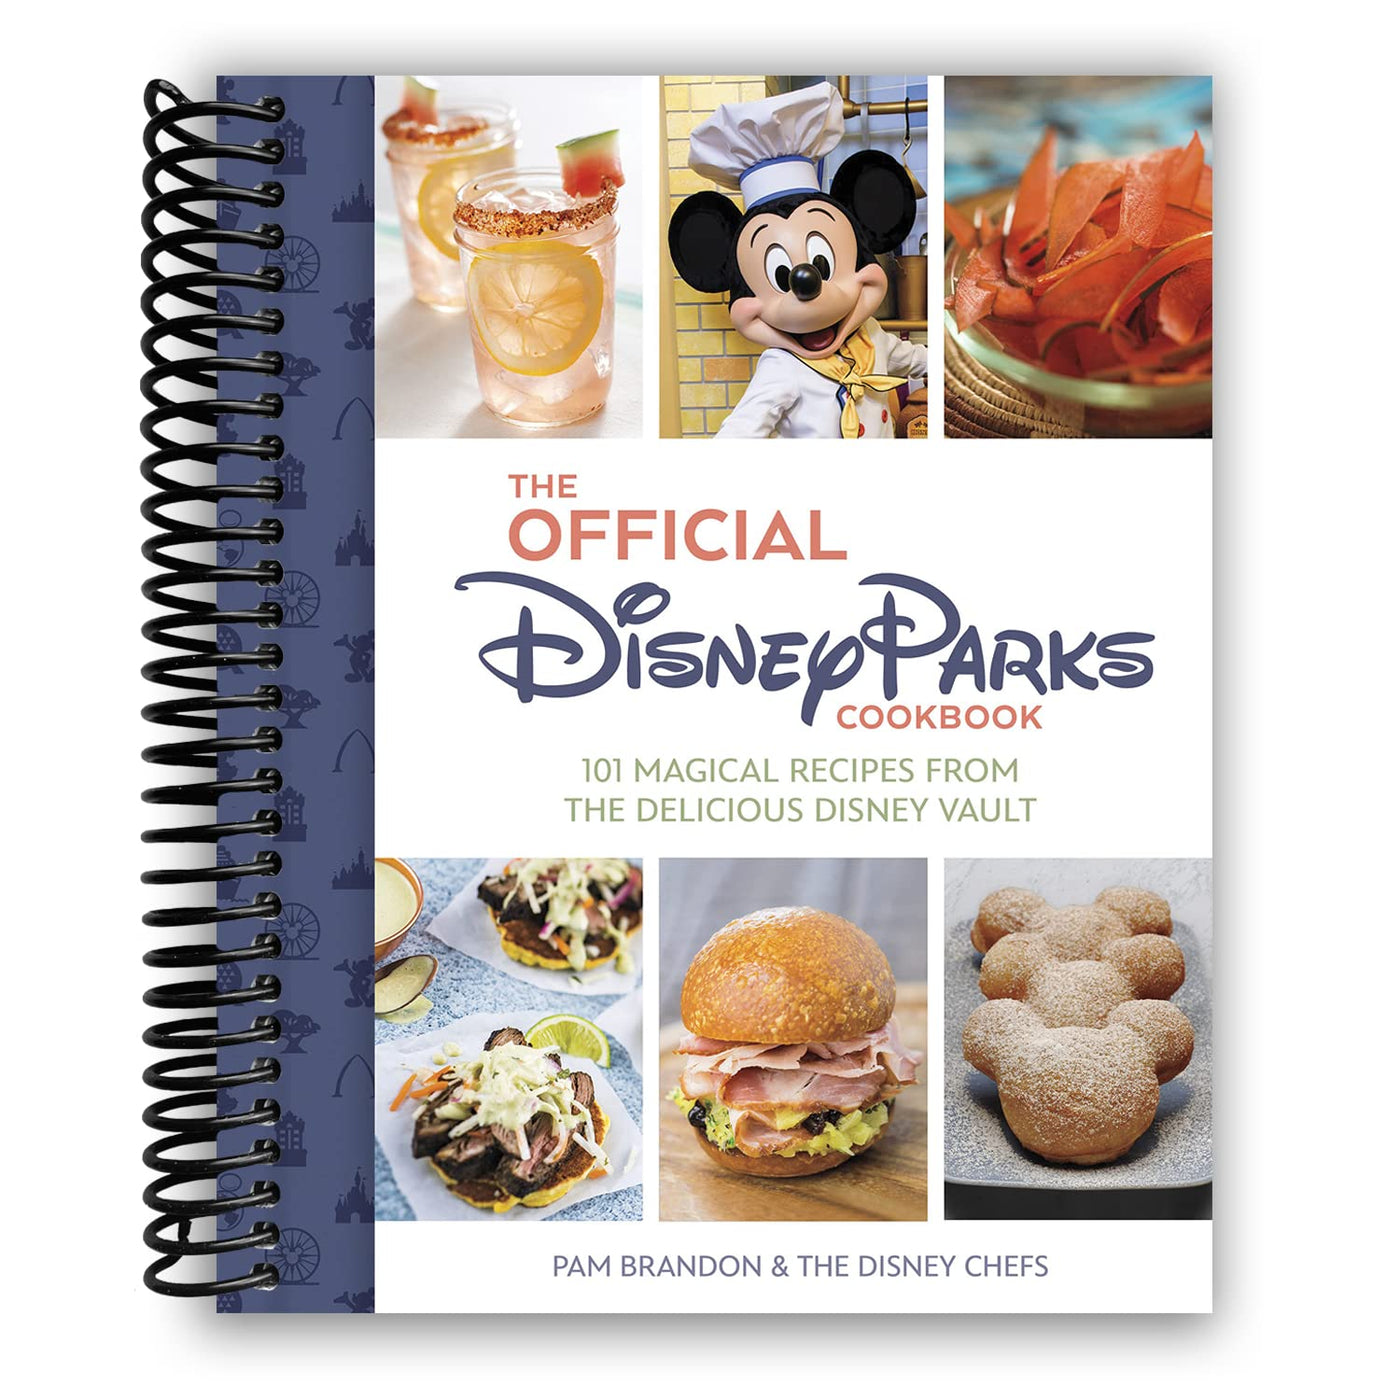 The Official Disney Parks Cookbook: 101 Magical Recipes from the Delicious Disney Vault (Spiral Bound)